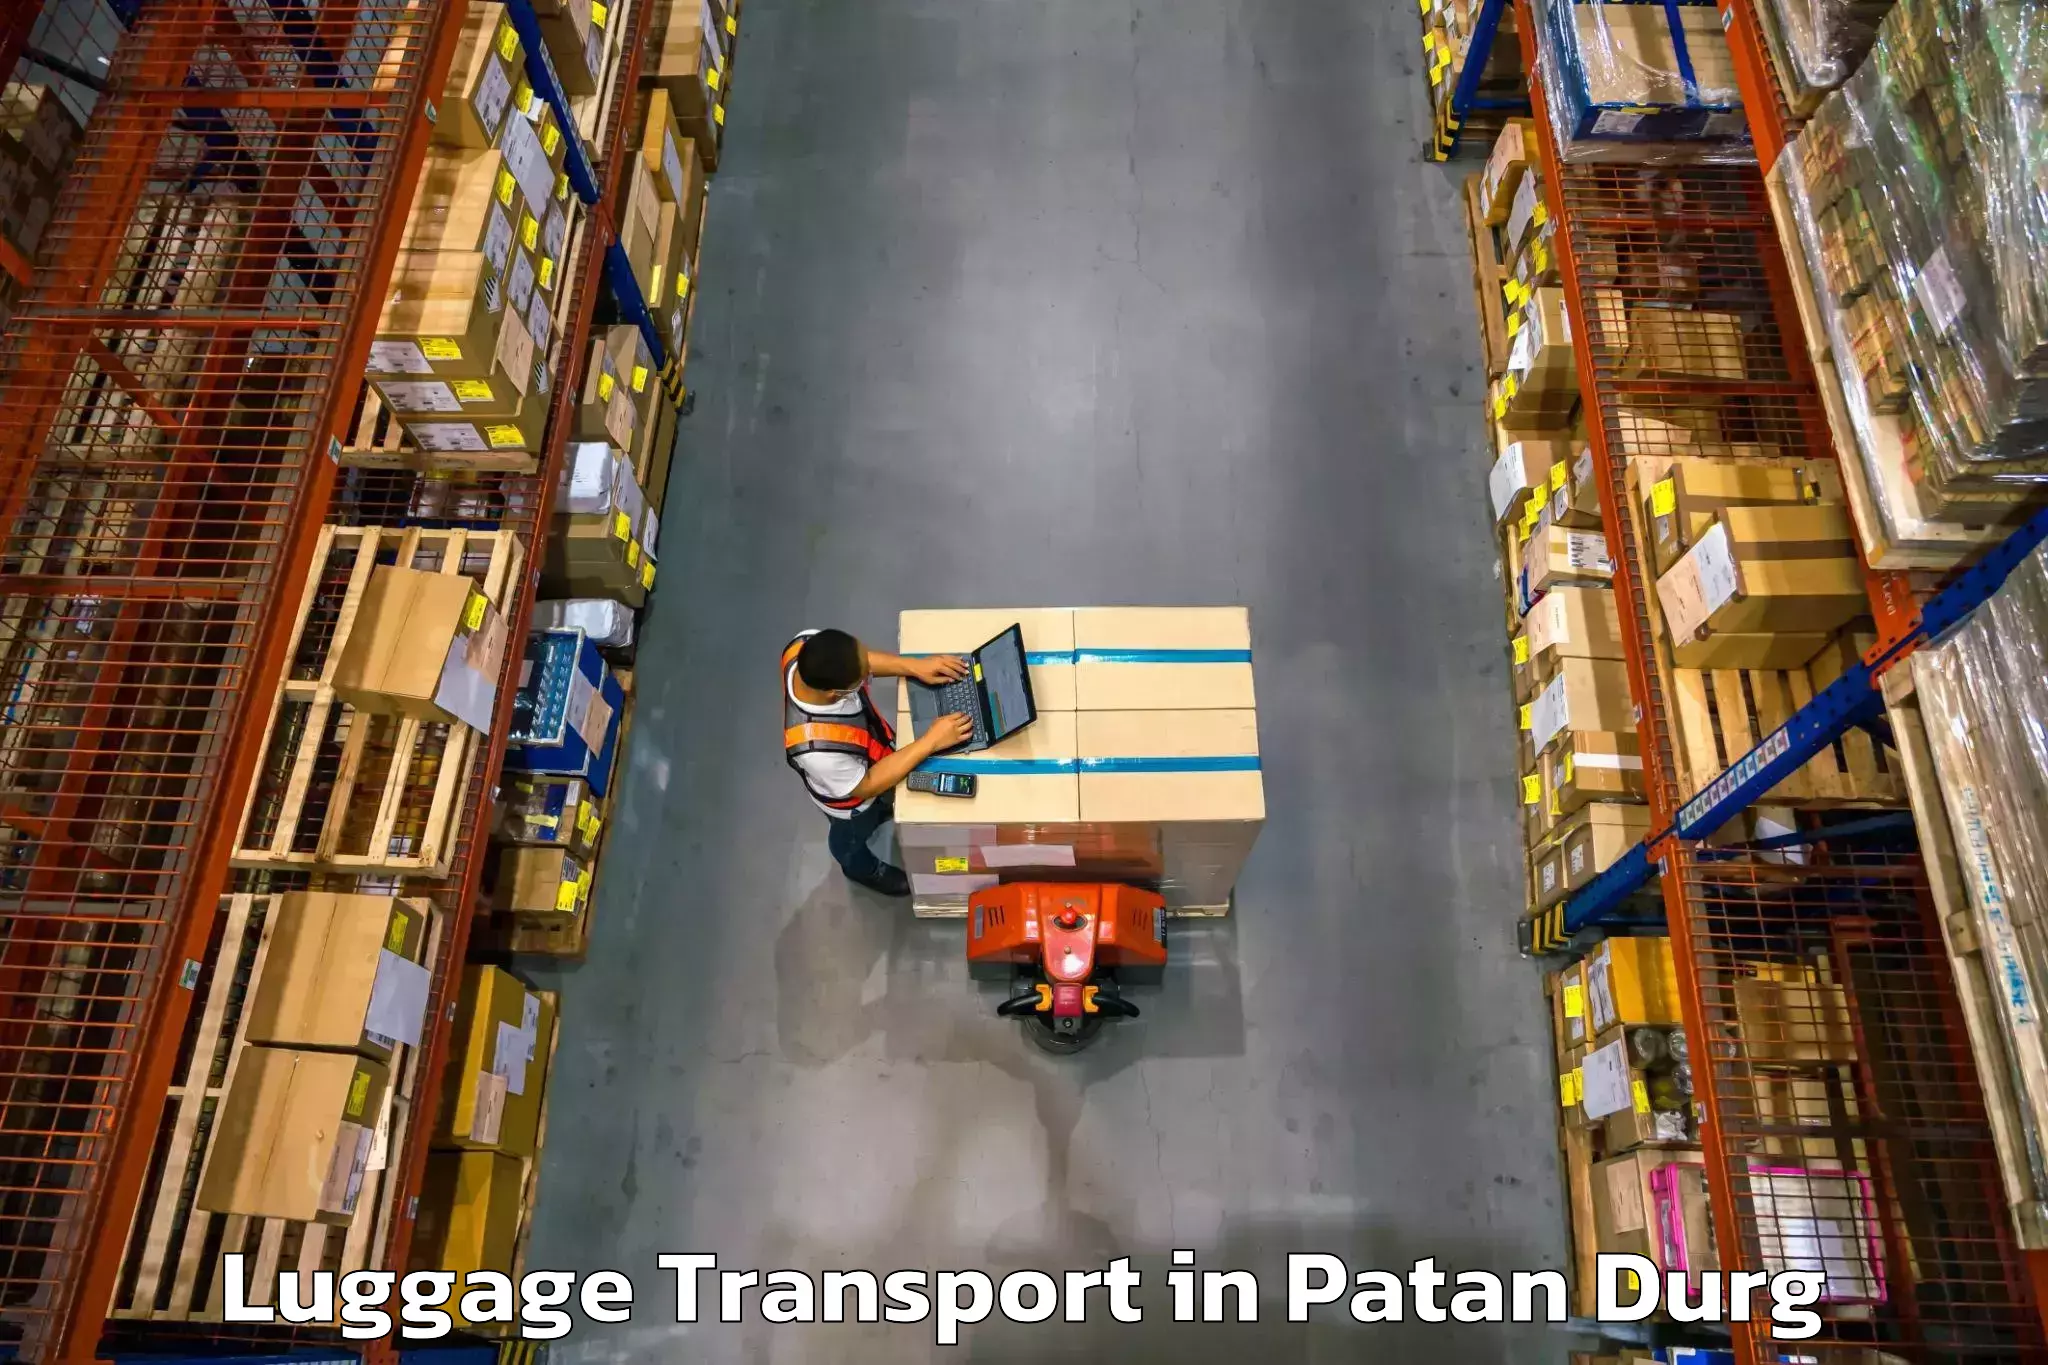 Luggage transport rates in Patan Durg